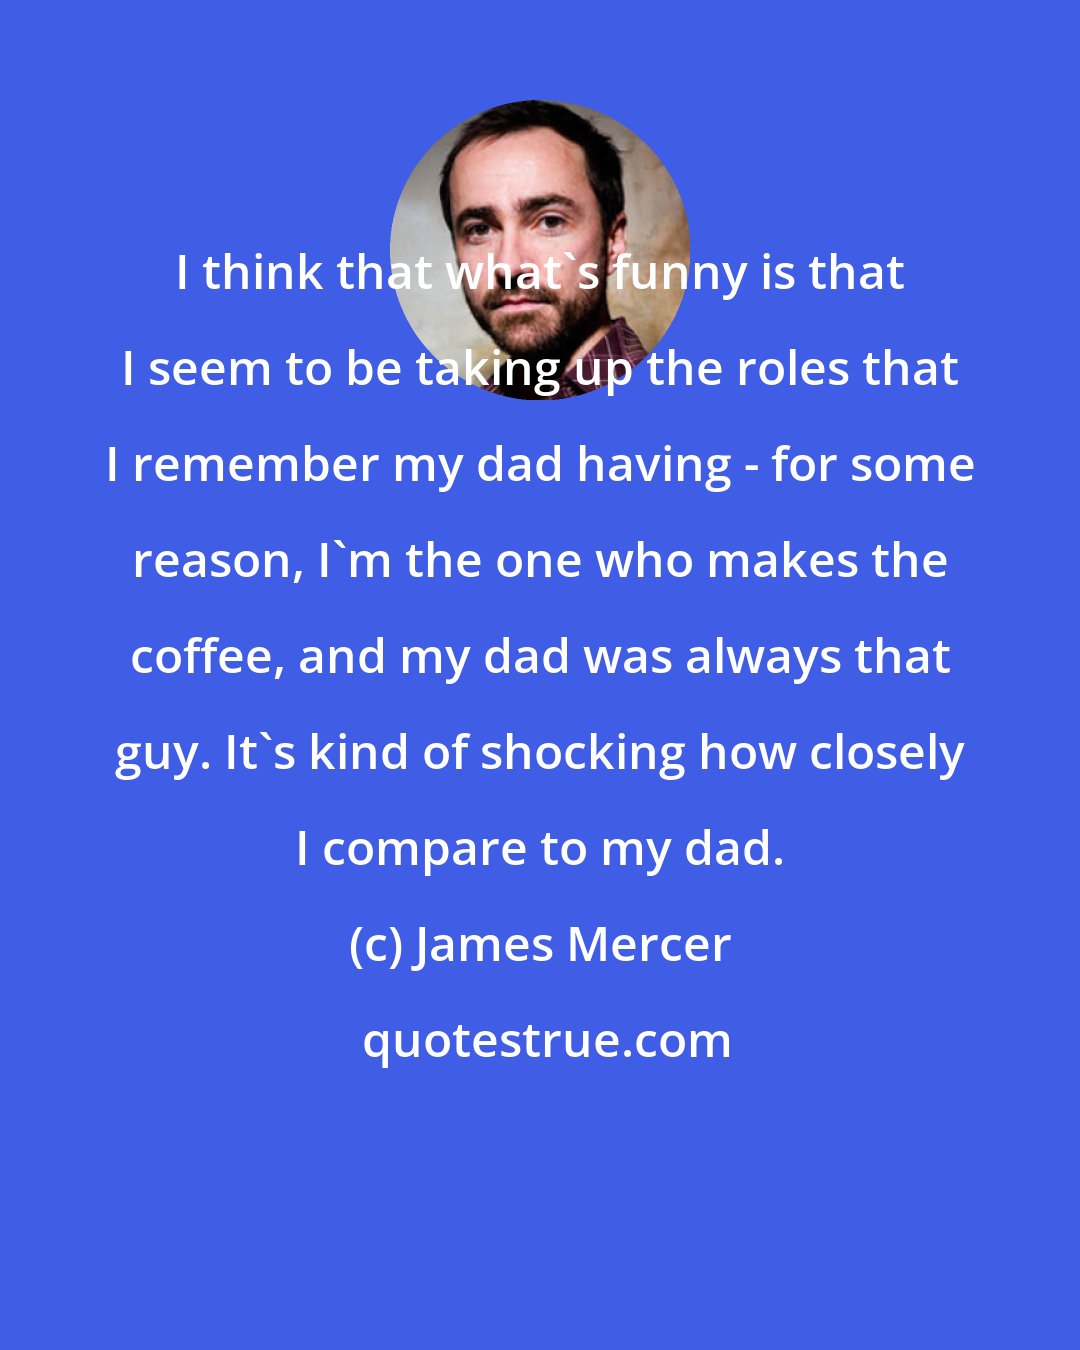 James Mercer: I think that what's funny is that I seem to be taking up the roles that I remember my dad having - for some reason, I'm the one who makes the coffee, and my dad was always that guy. It's kind of shocking how closely I compare to my dad.